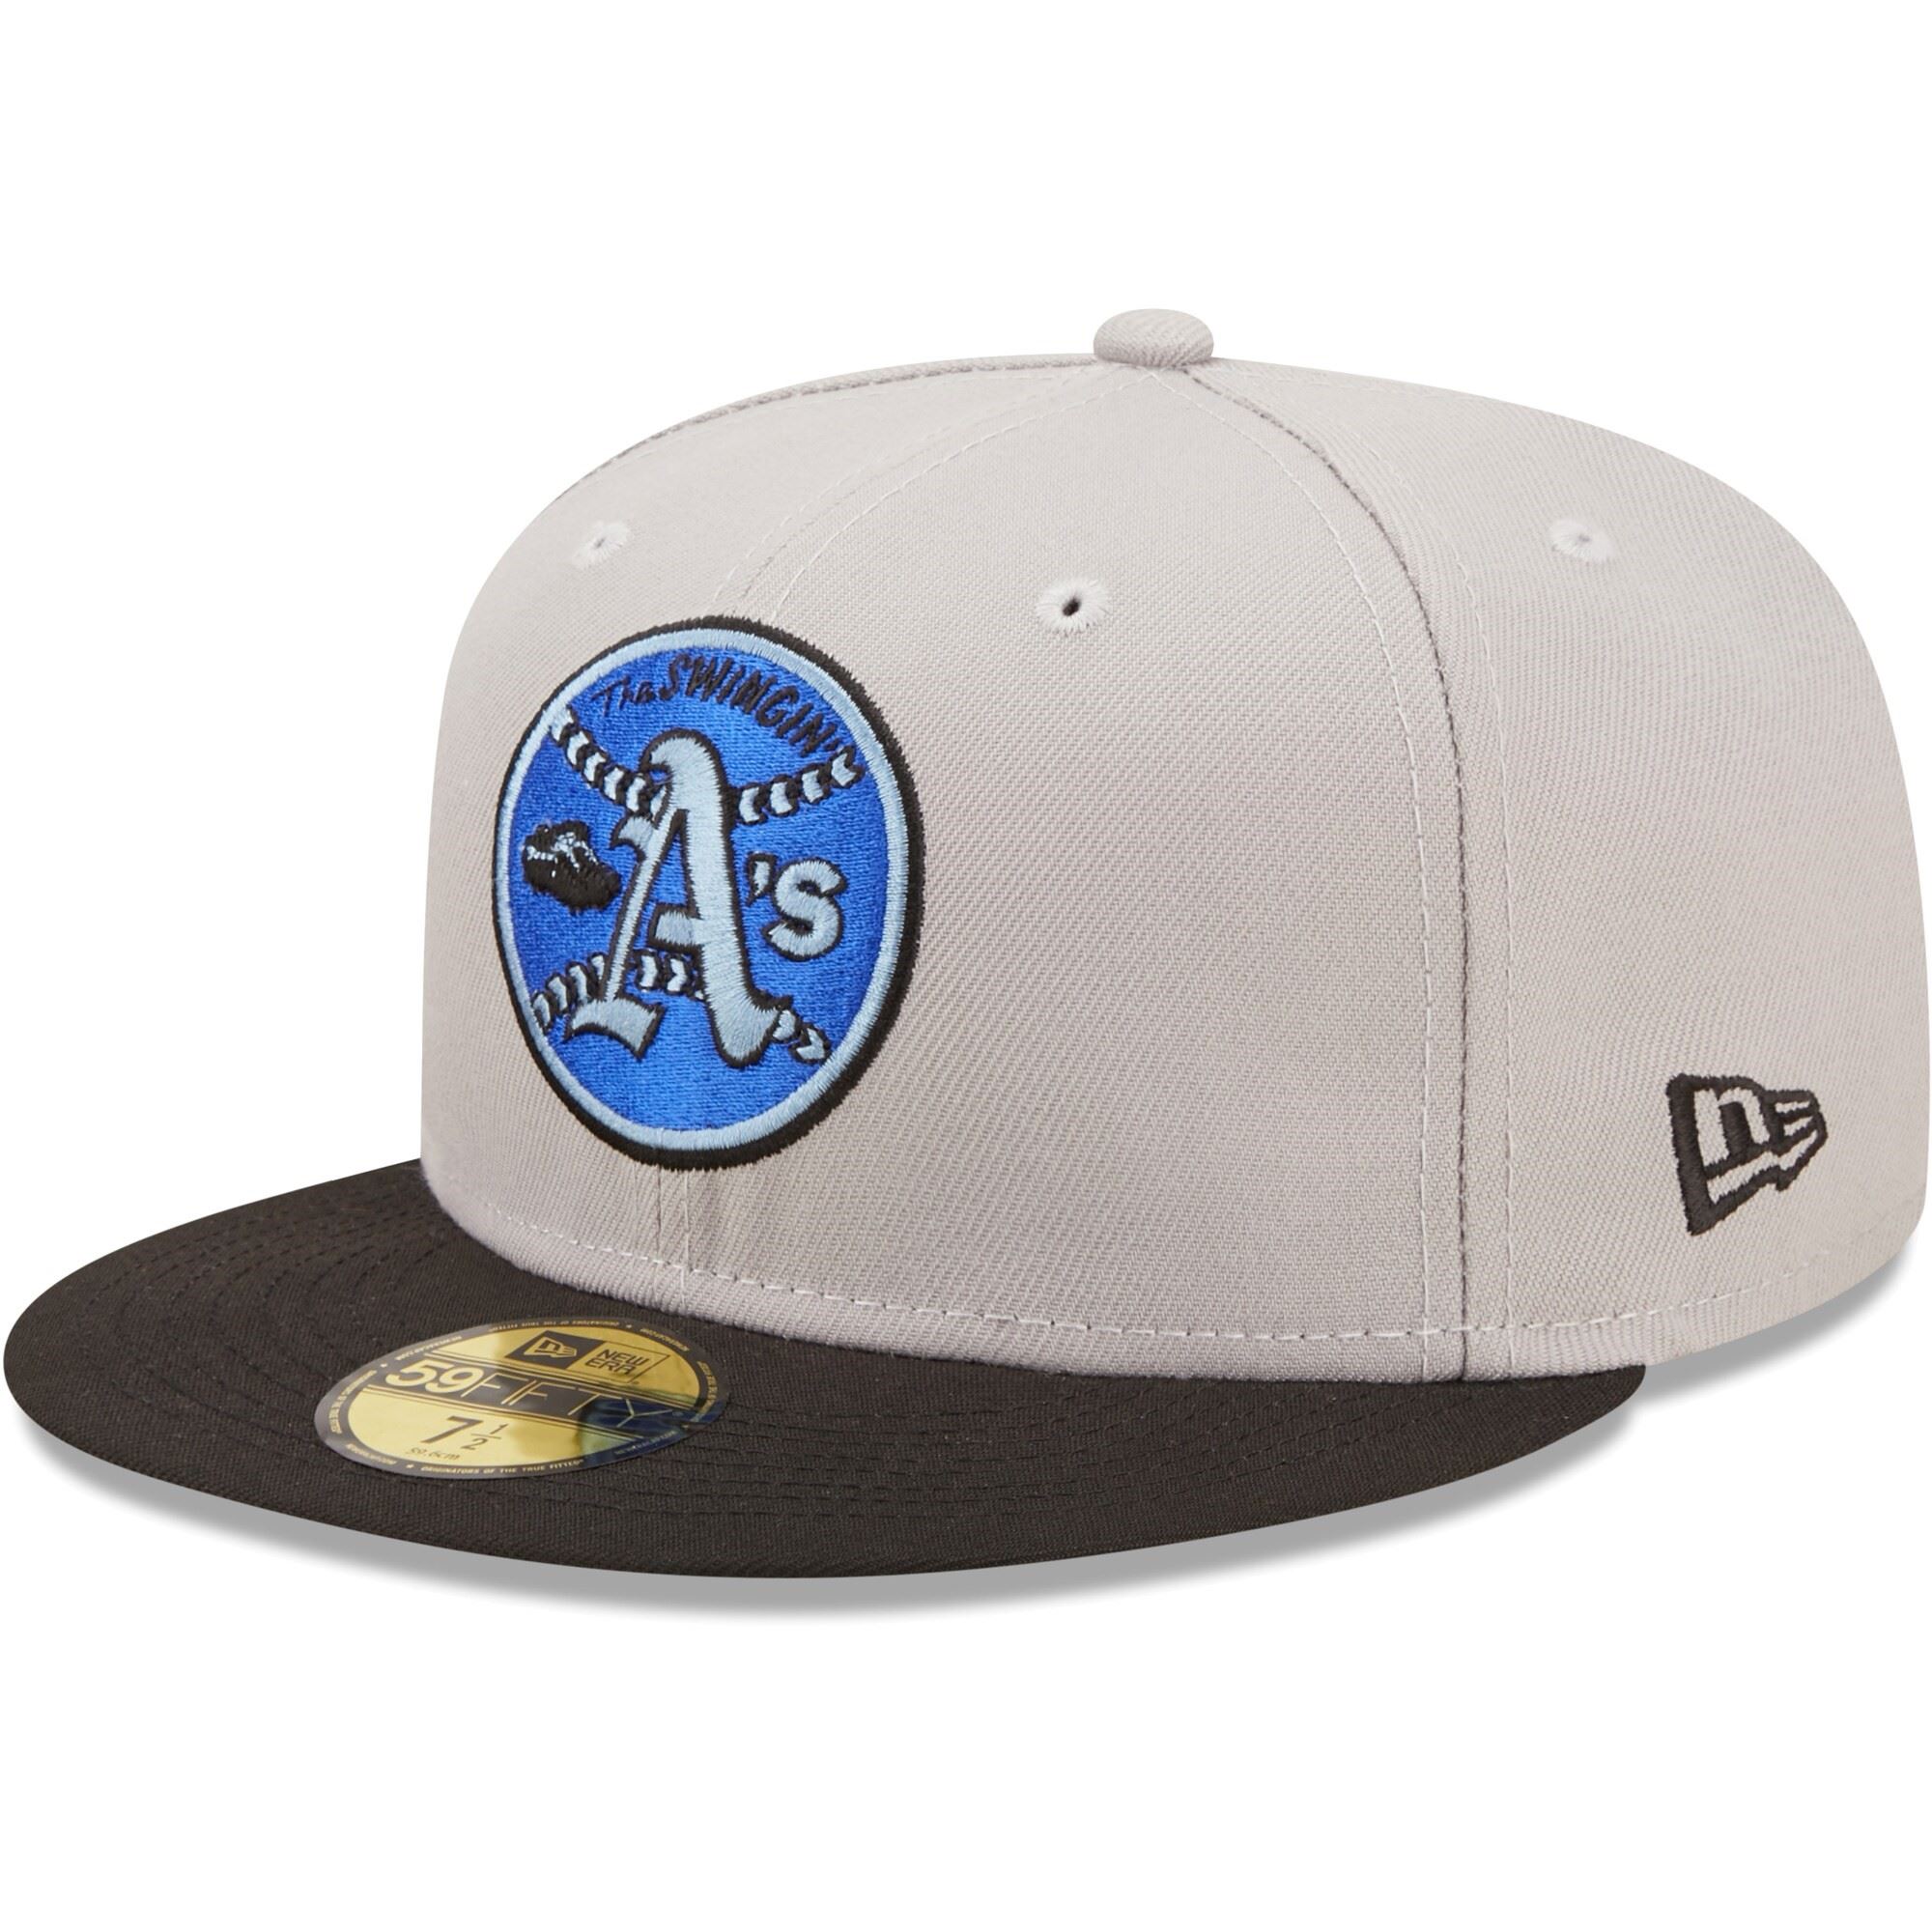 Oakland Athletics MLB Cooperstown 40th Anniversary Sidepatch Grey Black Royal 59Fifty Basecap New Era